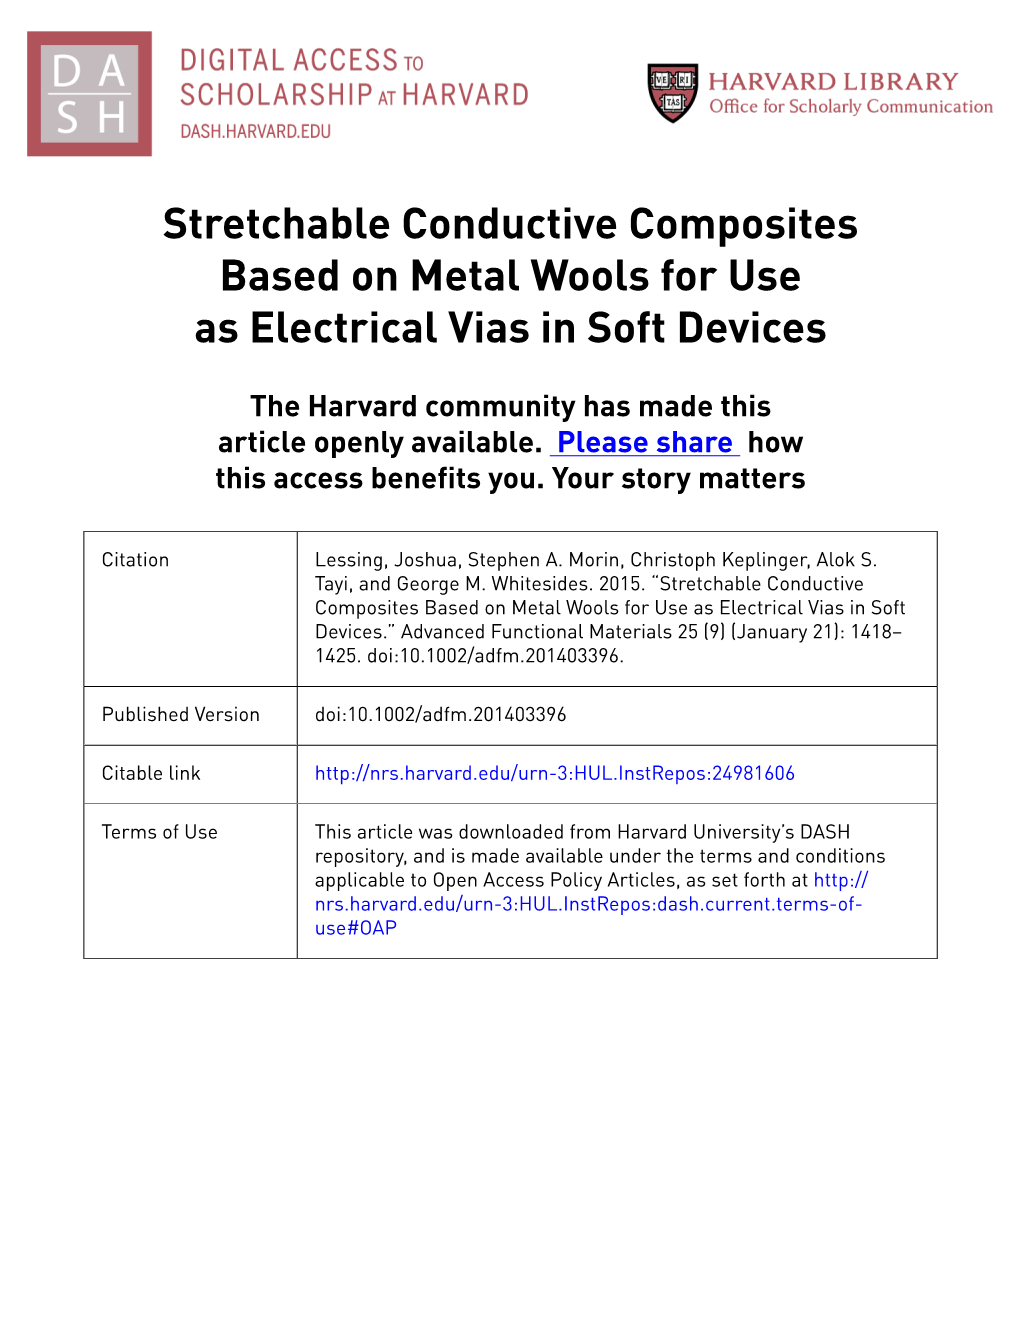 Stretchable Conductive Composites Based on Metal Wools for Use As Electrical Vias in Soft Devices